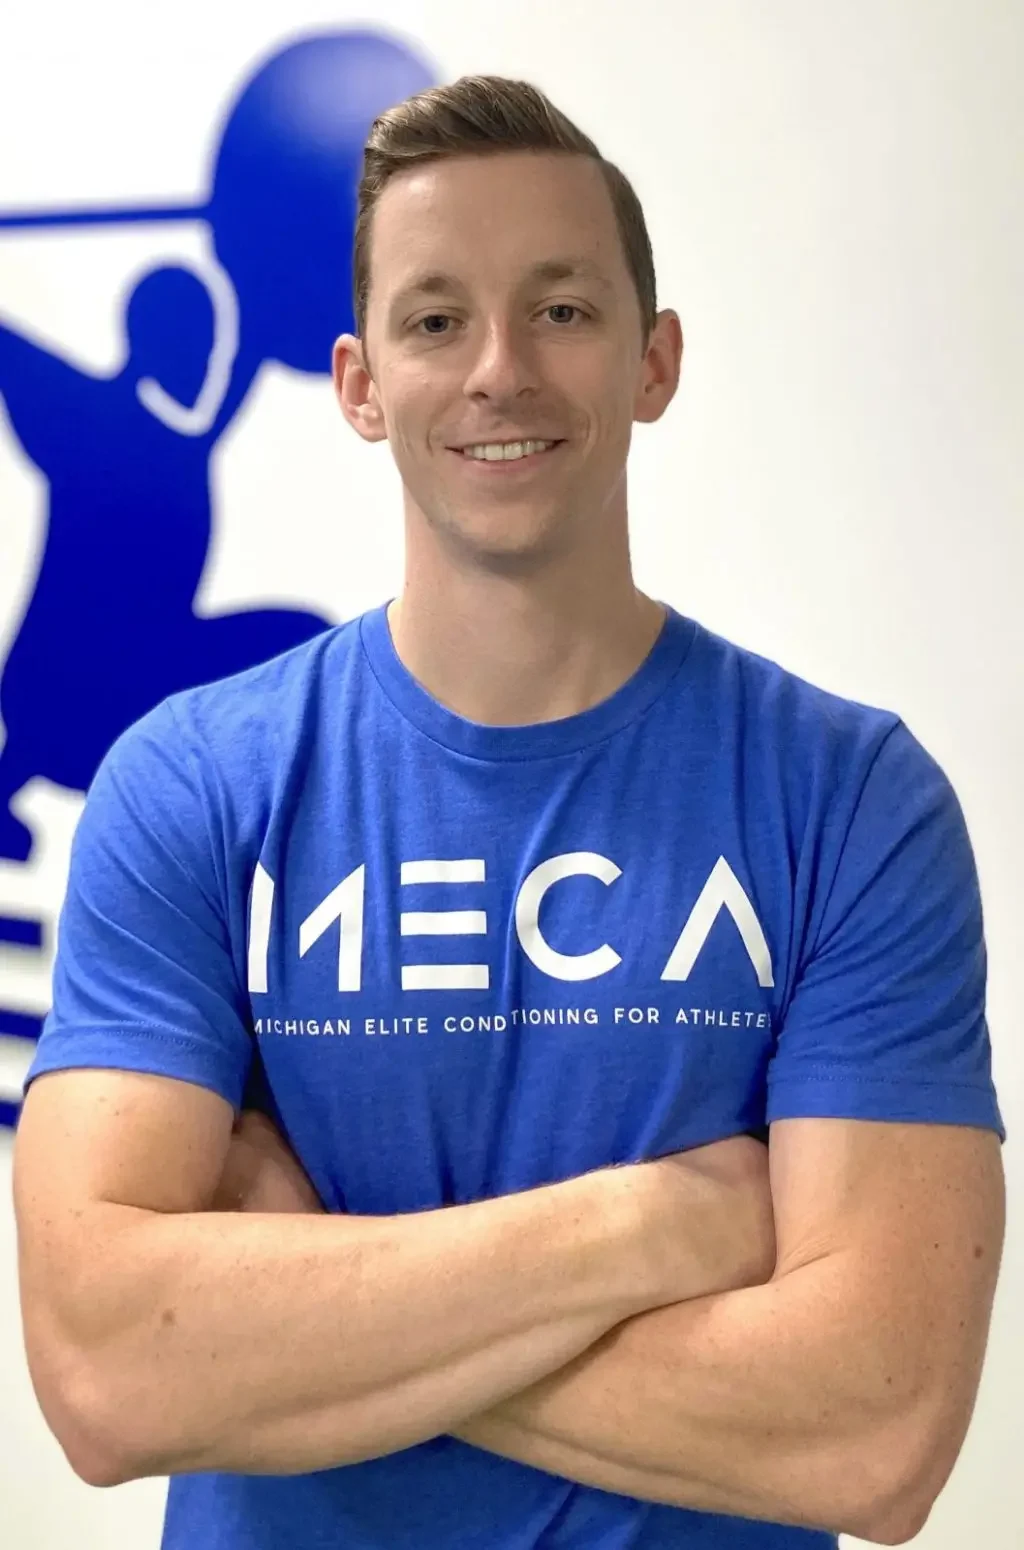 Alex who is a training coach at MECA is smiling at camera